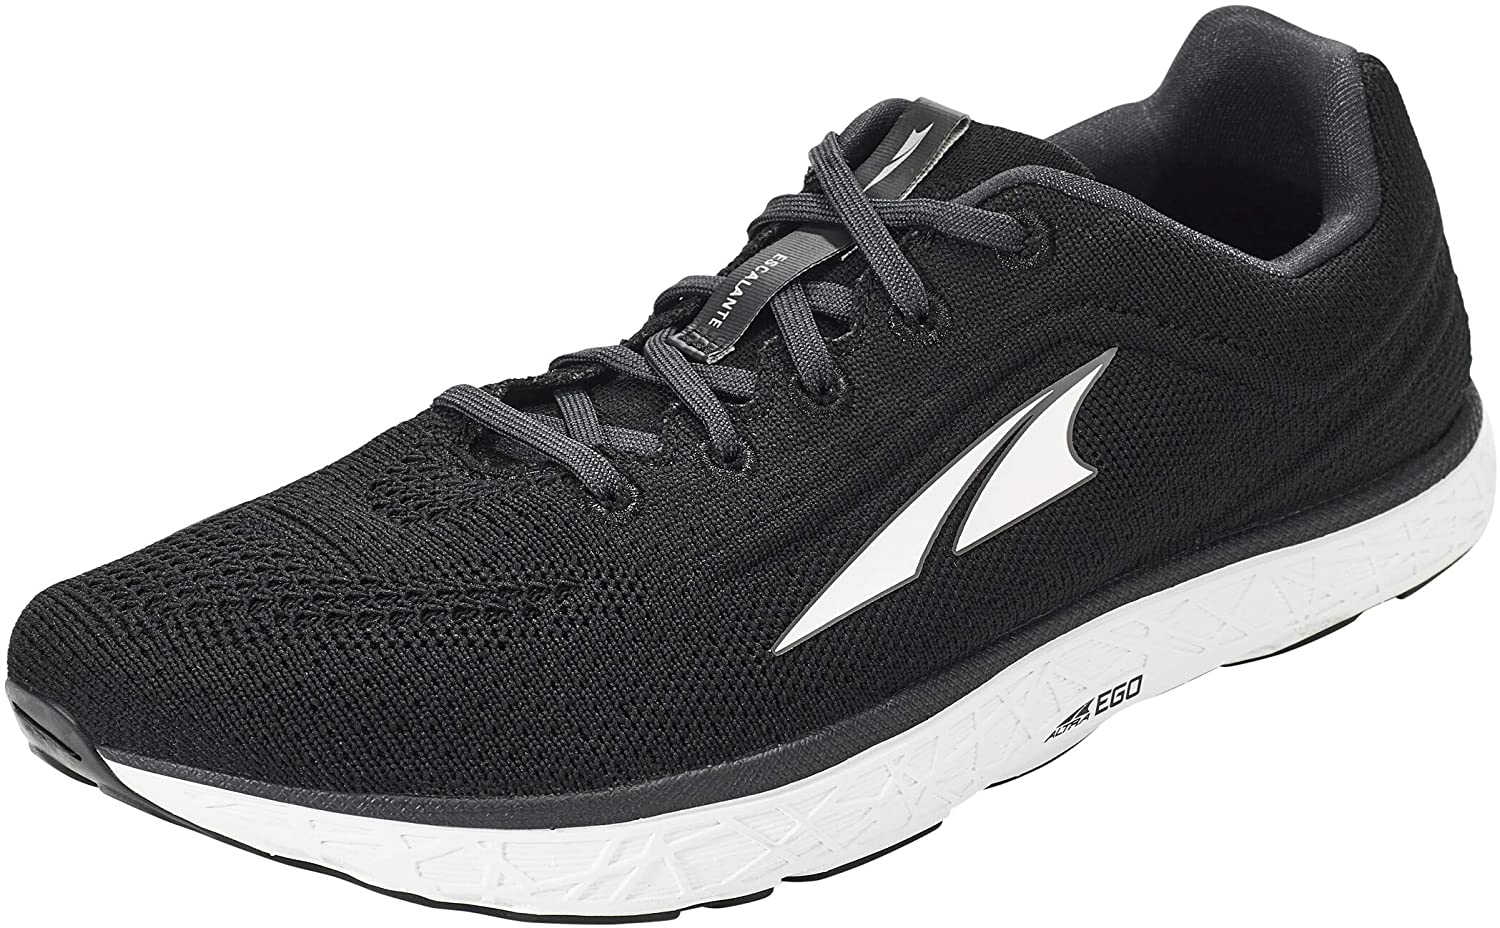 Altra Men's Escalante 2.5 Road Running Shoe in Black from the side